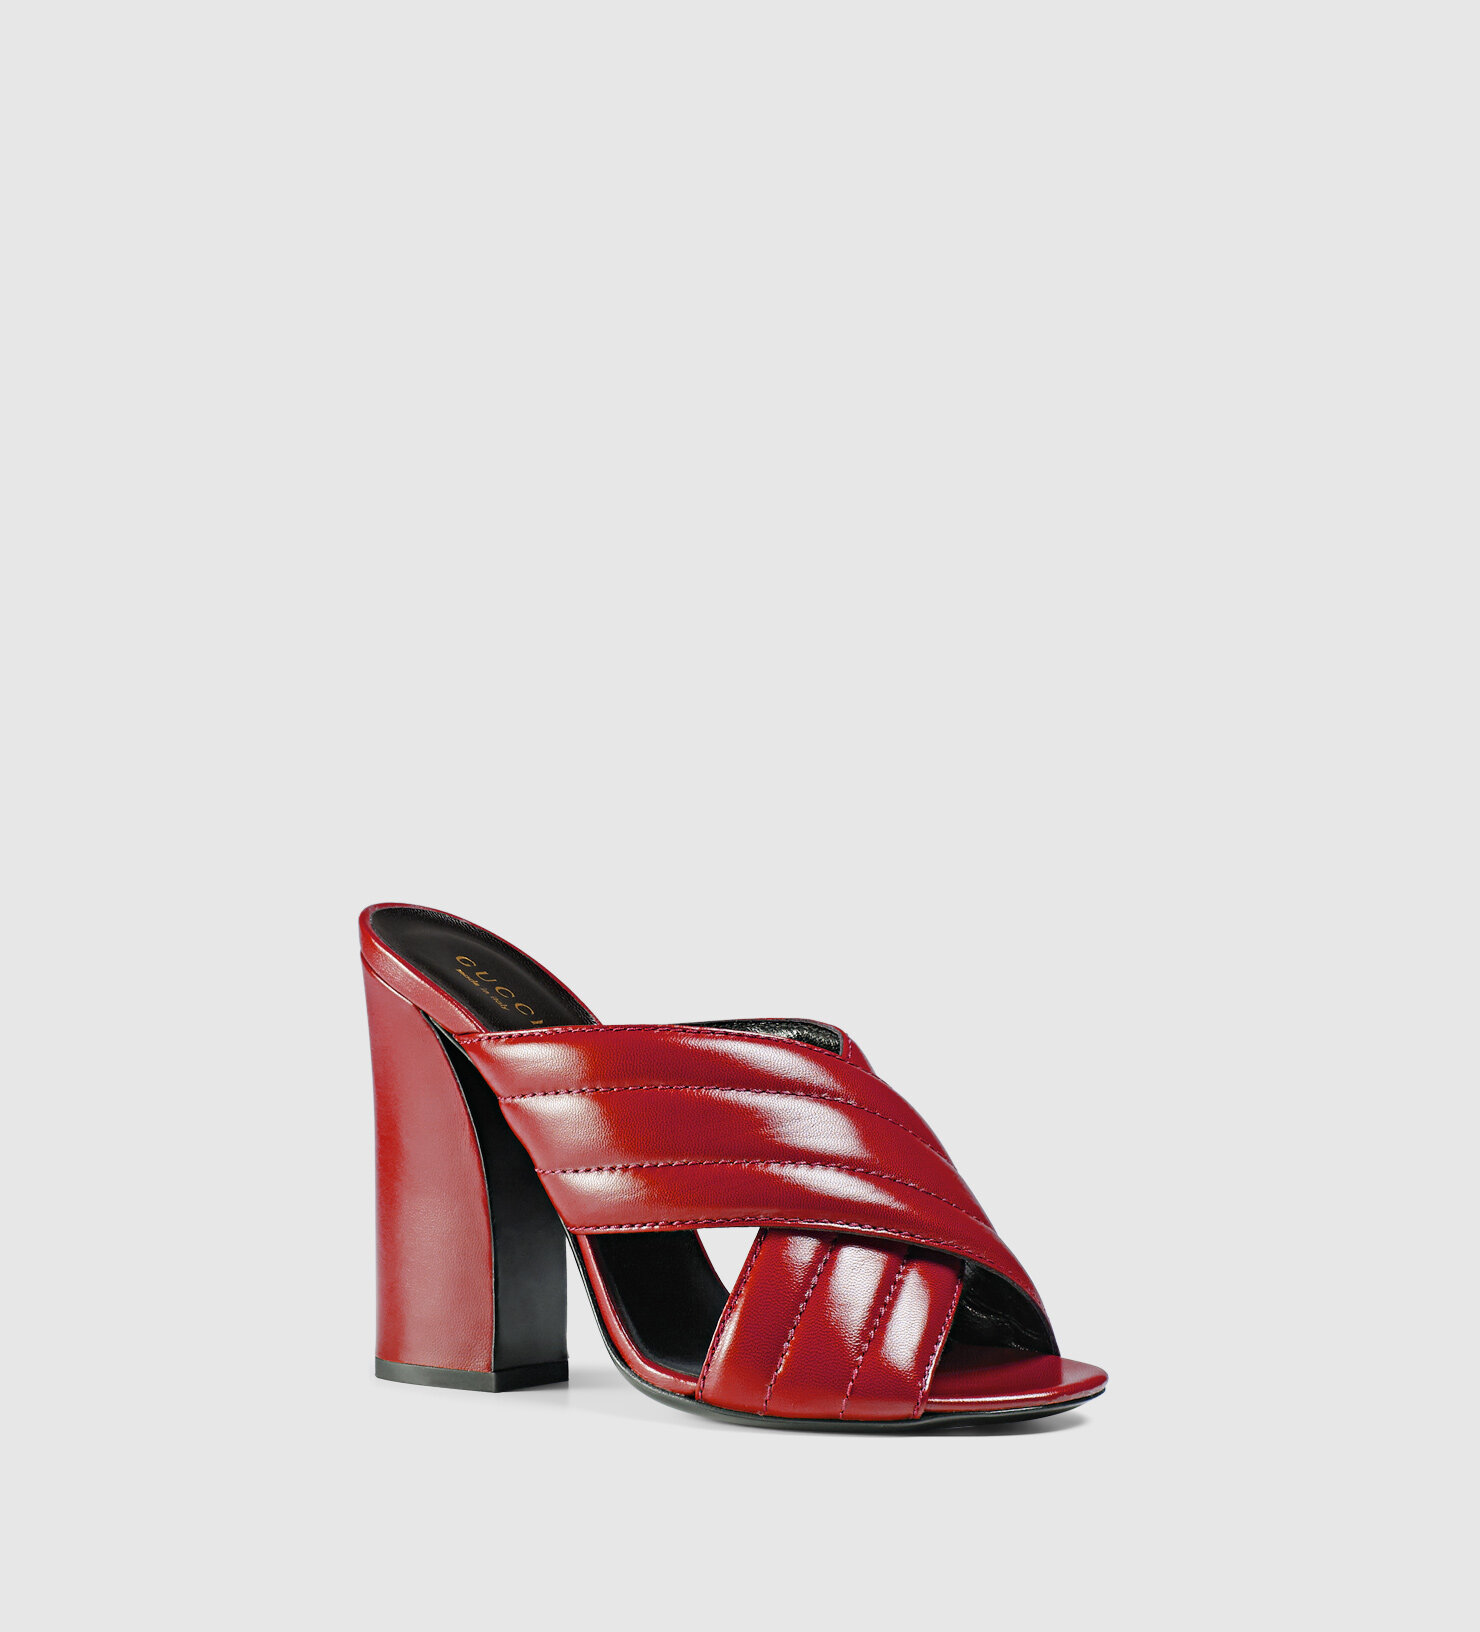 Gucci Sylvia 110 Mules in Hibiscus Red Leather.jpg